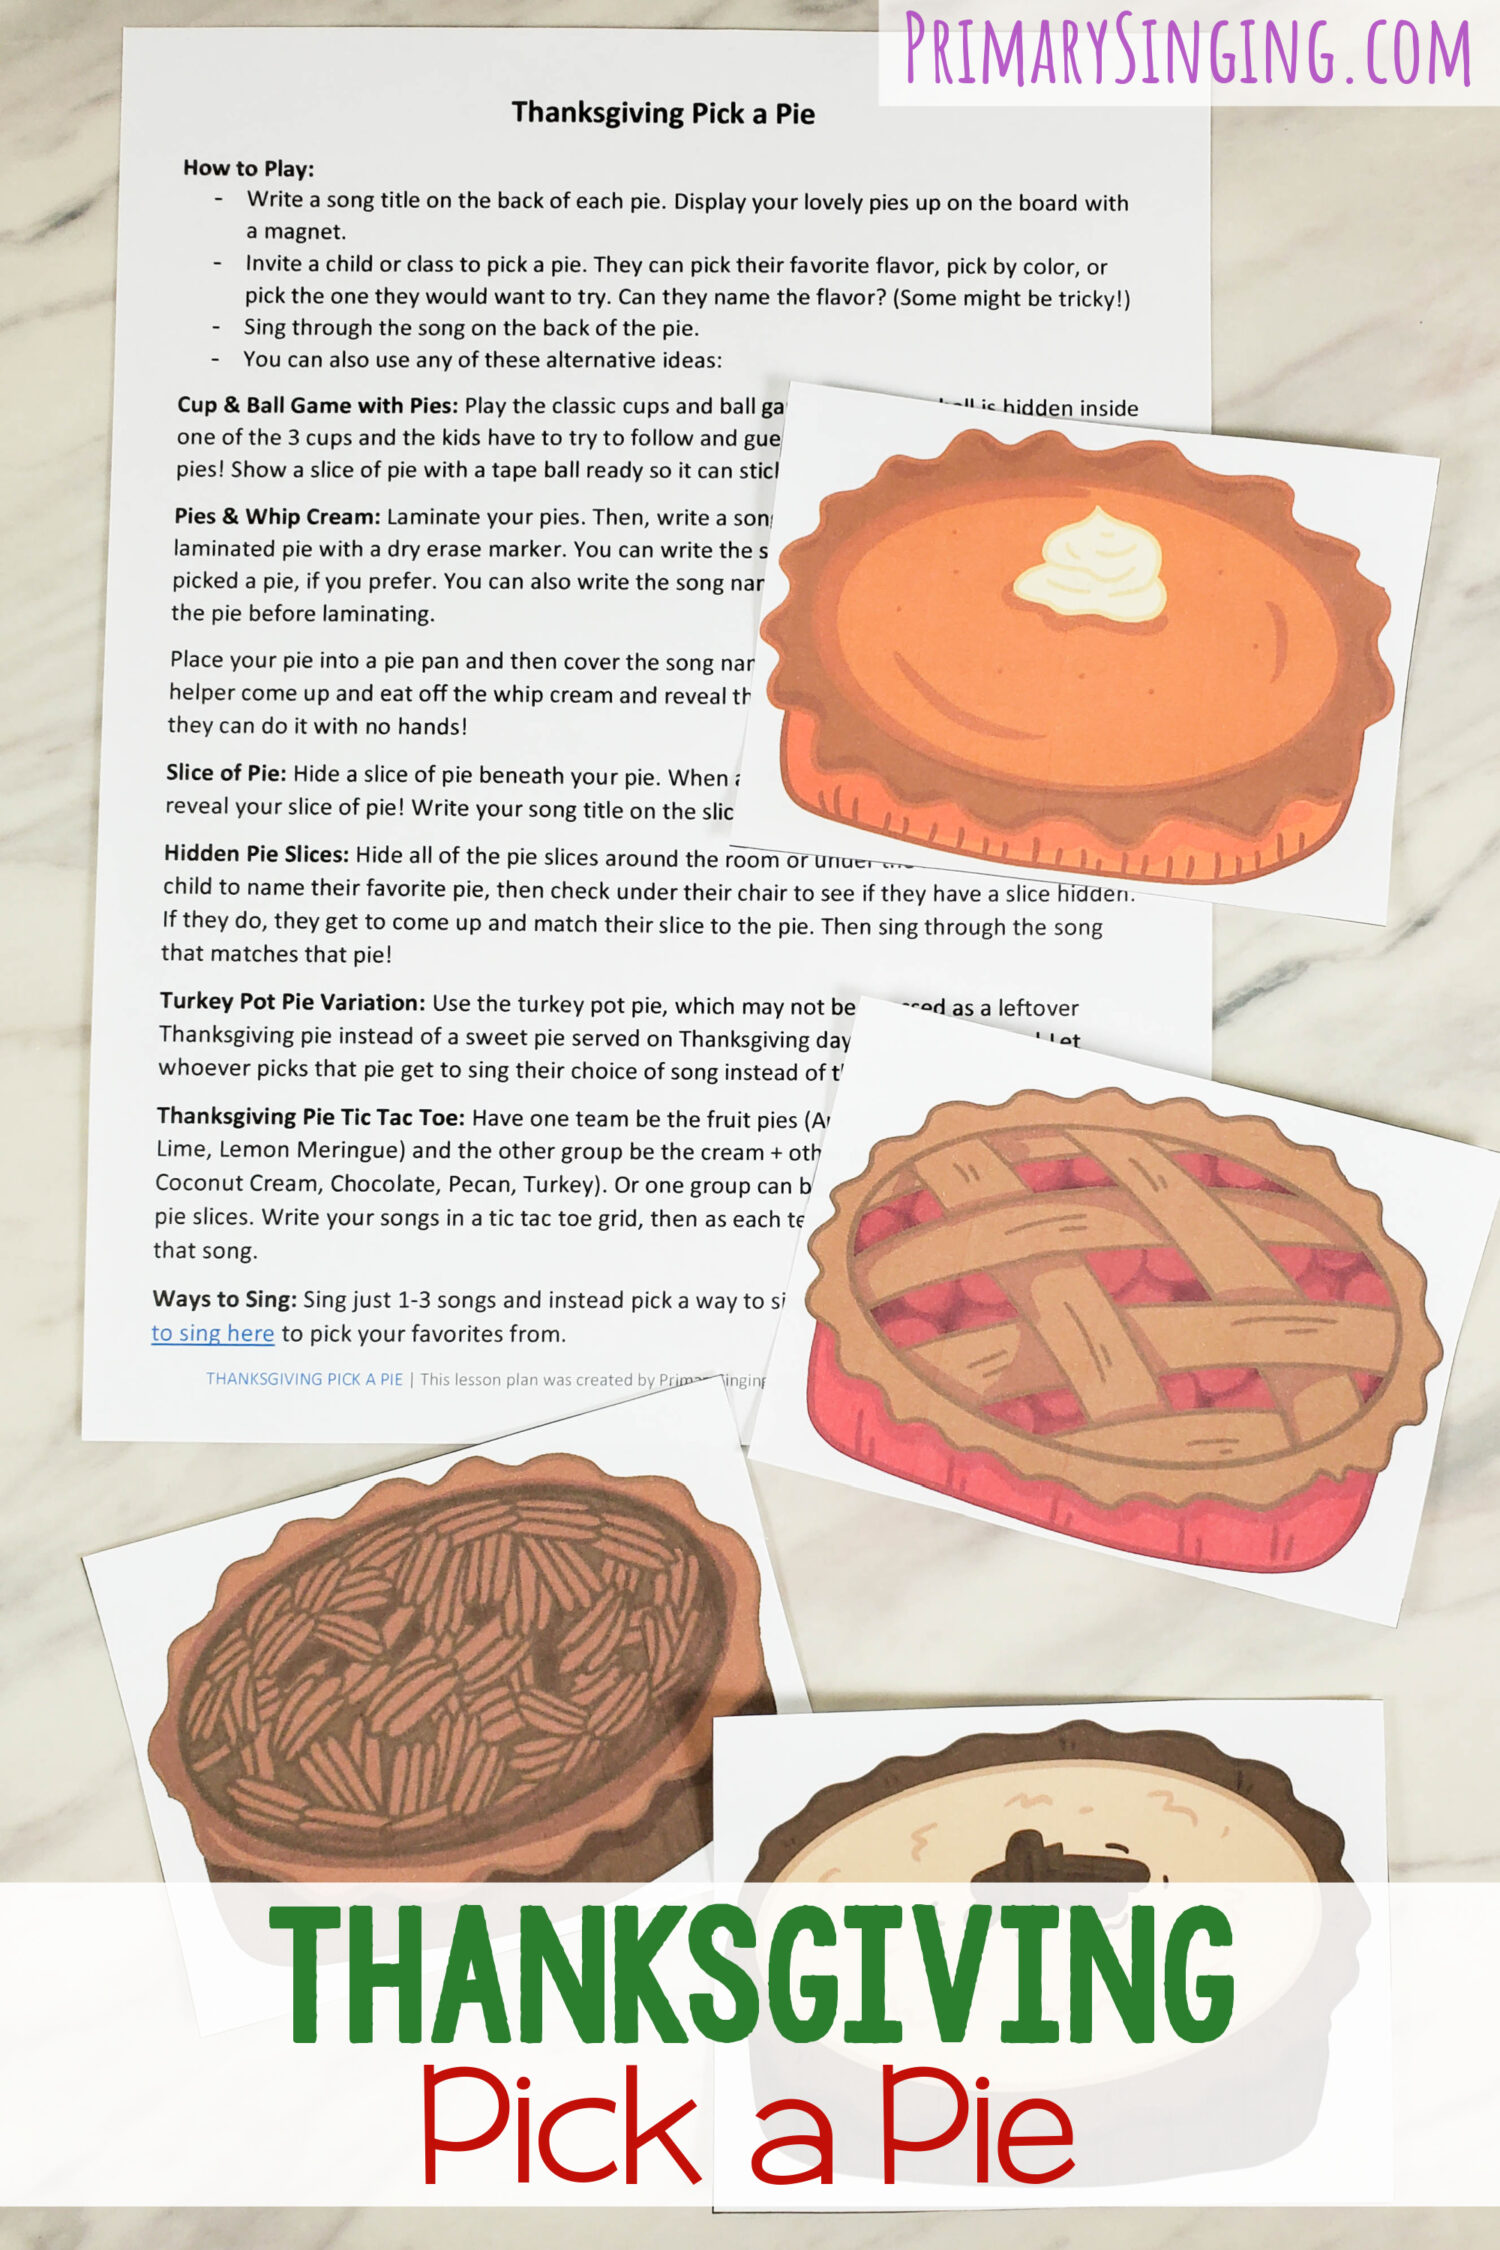 Thanksgiving Pick a Pie Singing Time - Pick your favorite Thanksgiving Pie and sing through the song on the back of the pie. Plus, fun additional ways to play. Printable song helps for LDS Primary music leaders.